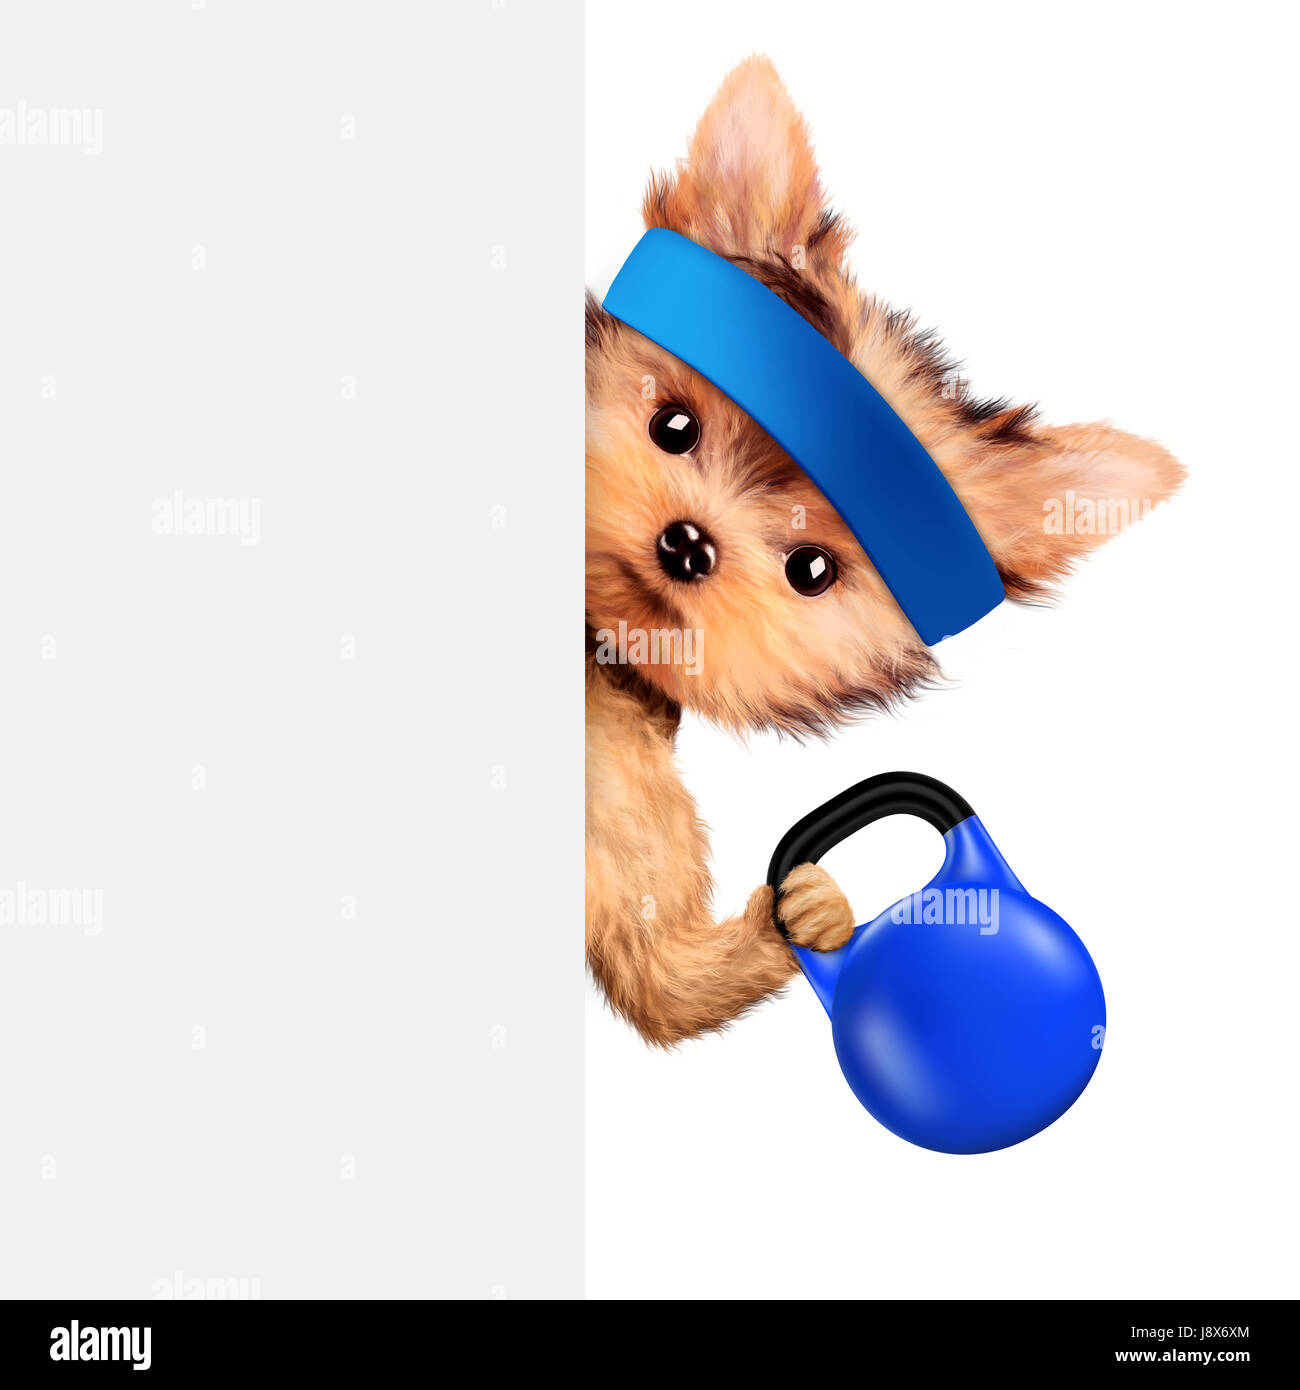 Funny dog training with kettlebell behind banner Stock Photo